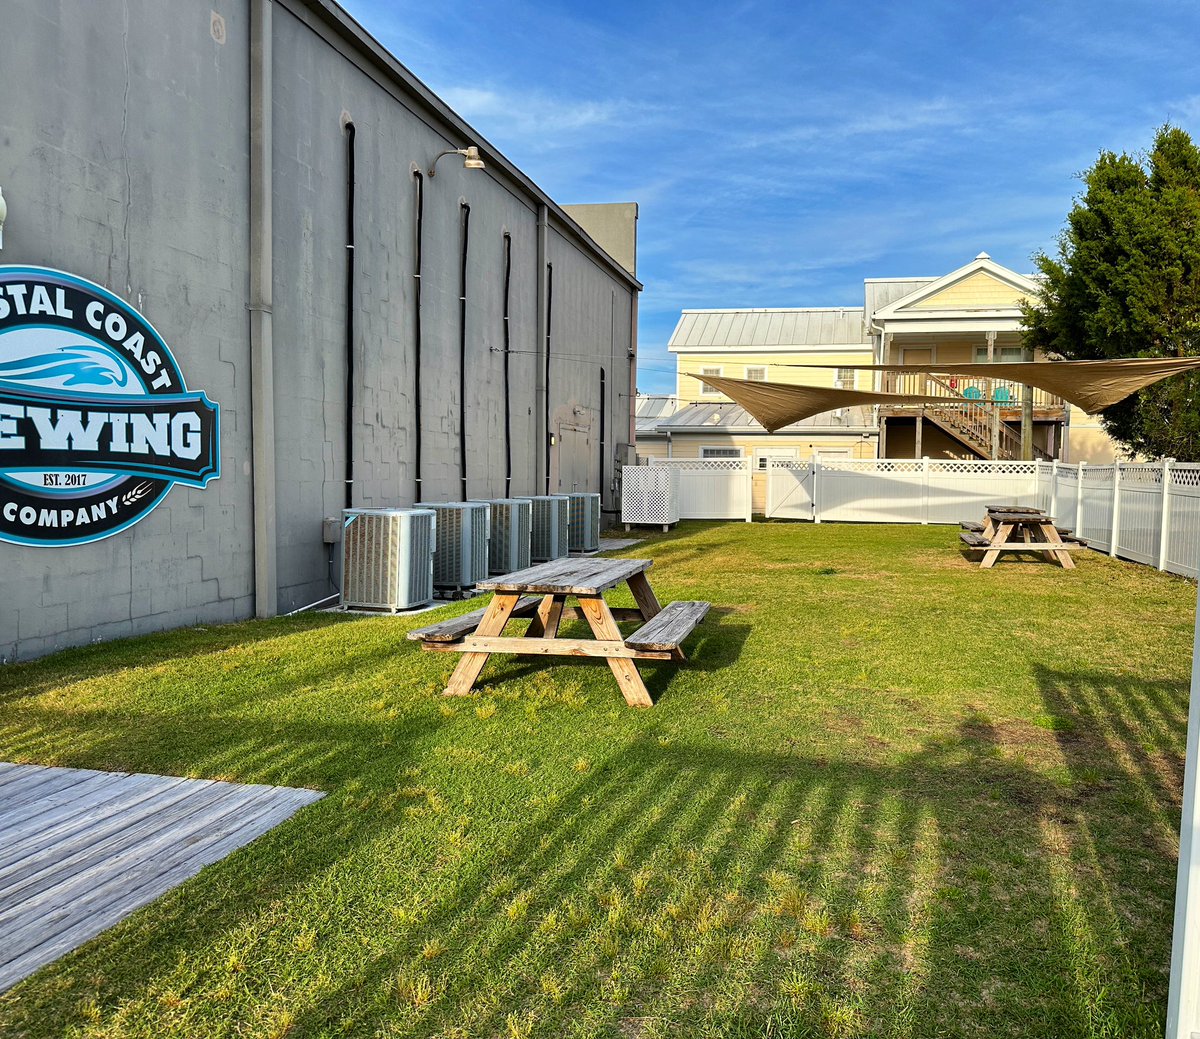 A beautiful day here on the Crystal Coast! We’re open from 2pm to 9:30 today, and our outdoor area is the perfect spot to enjoy our Wednesday $4 pint special and soak up the sun! 🍺🕶️☀️